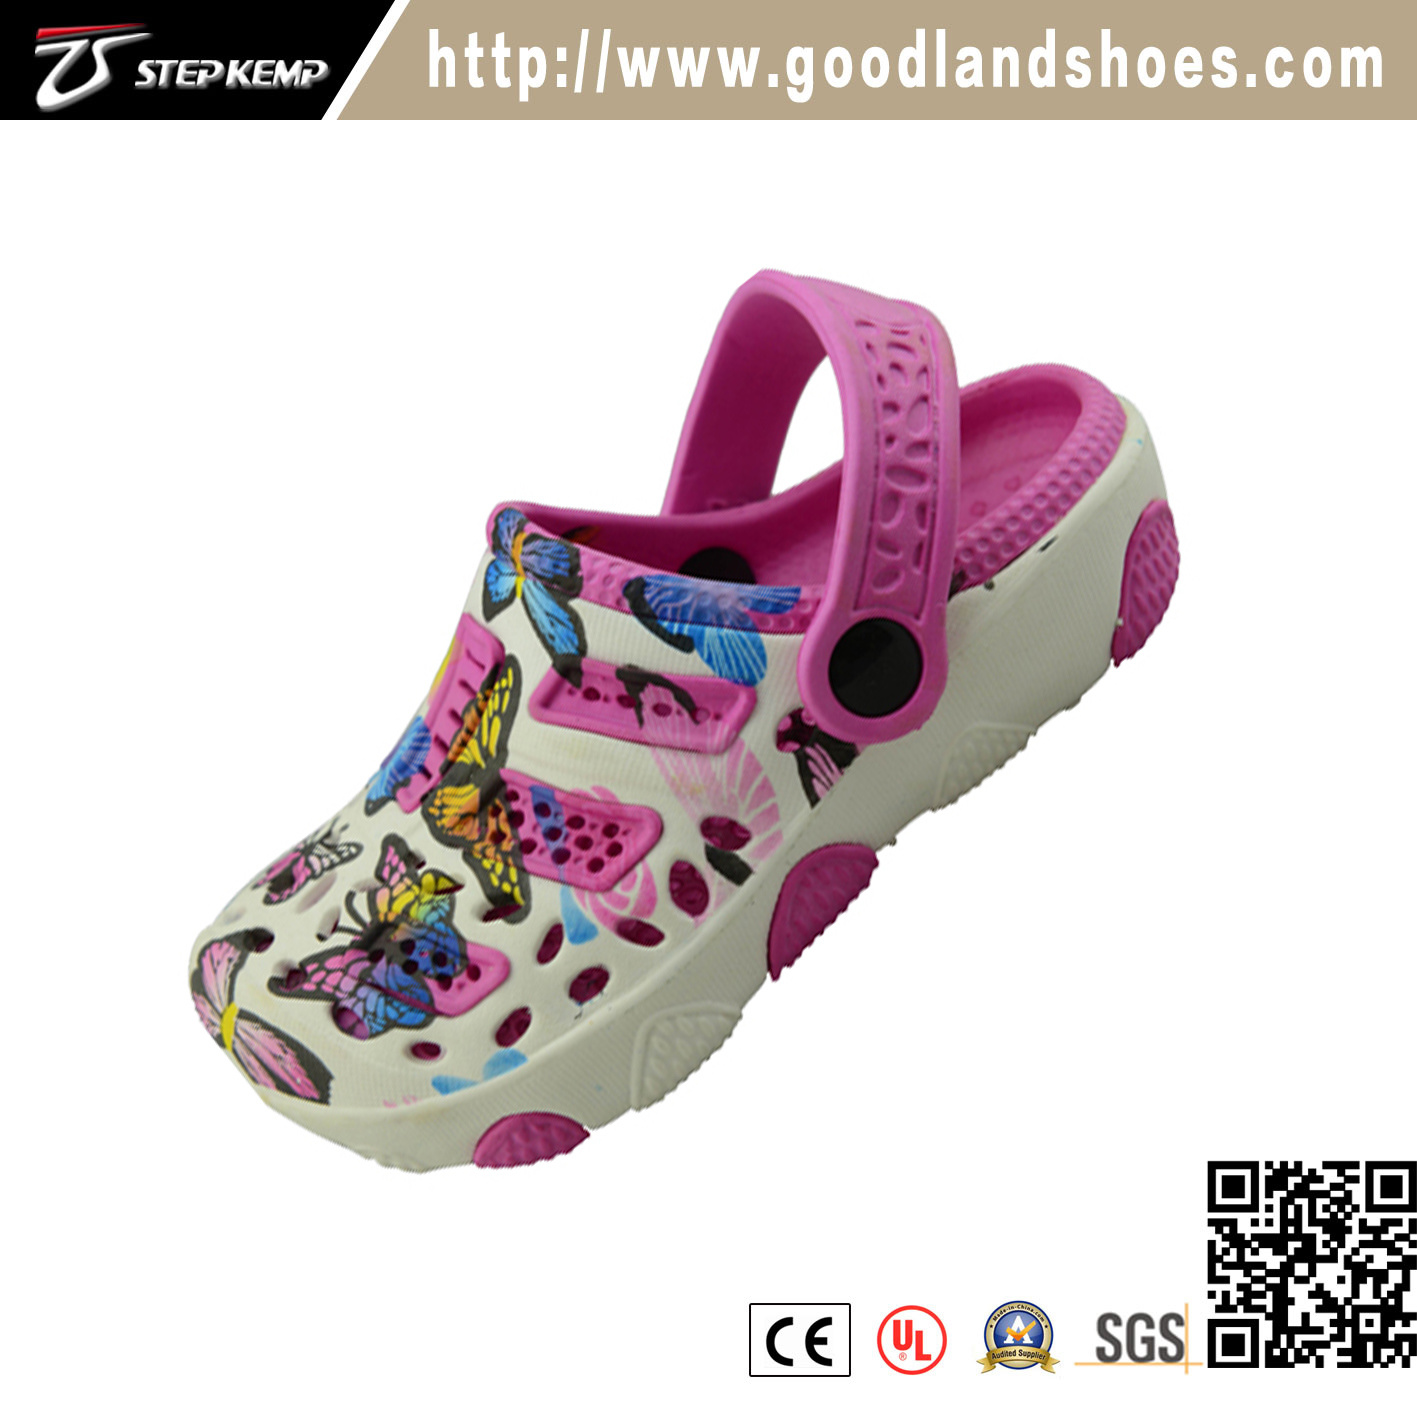 Kids Garden Confortable Clog Painting Shoes for Children 20288A-4